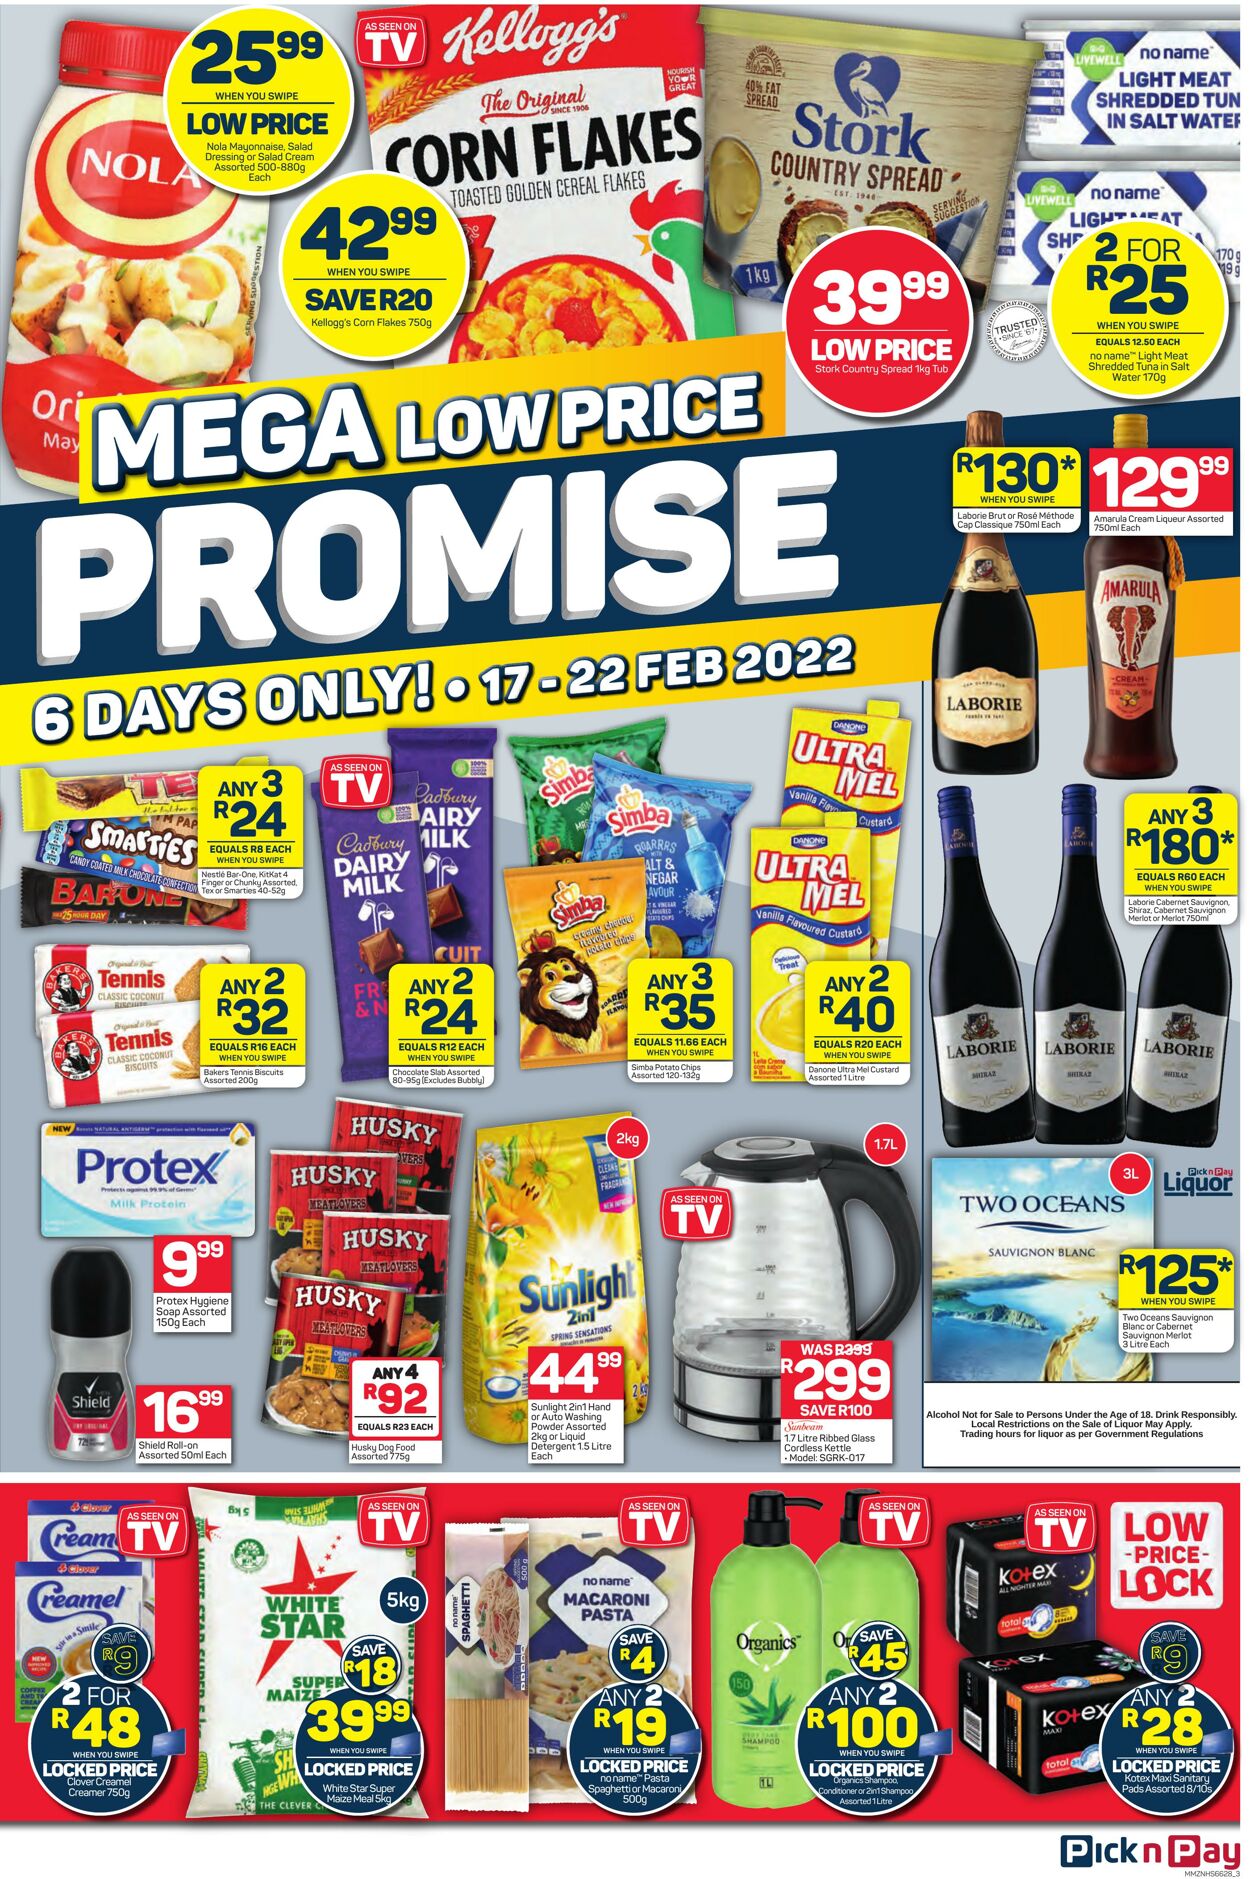 Special Pick n Pay 17.02.2022 - 22.02.2022